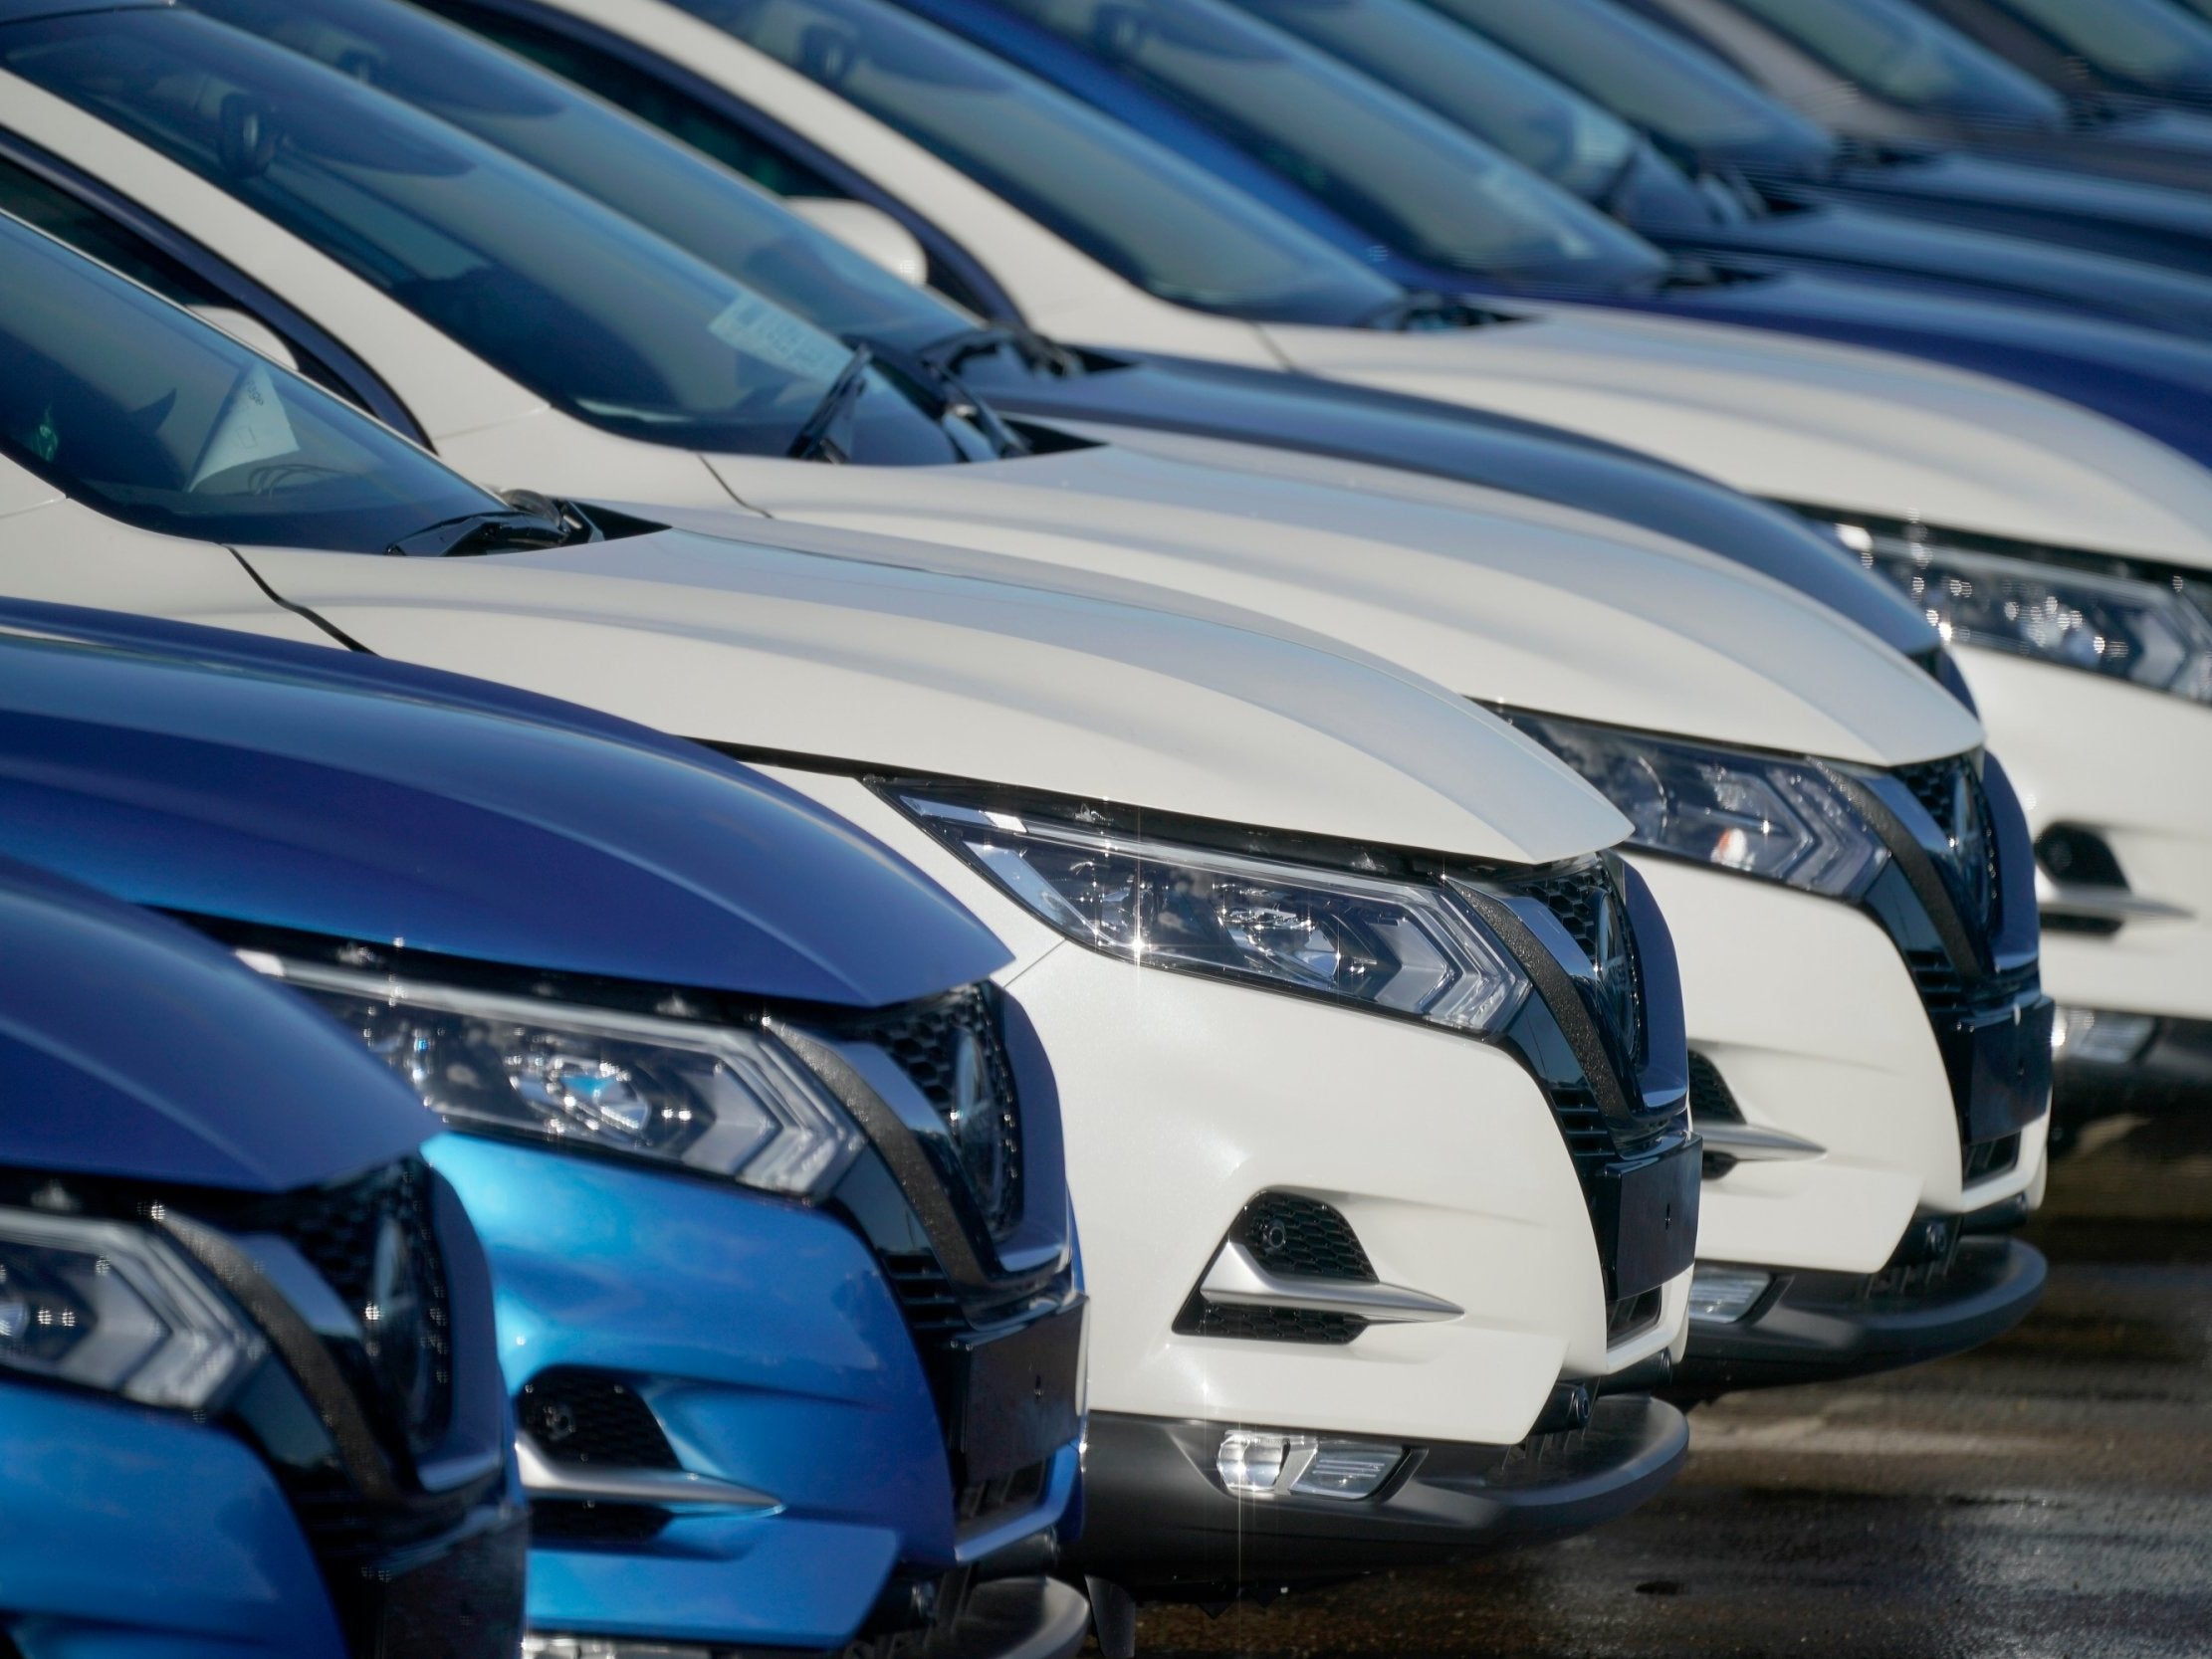 Monthly payments for car contracts have increased more than one-and-a-half times as fast as cars' cash prices